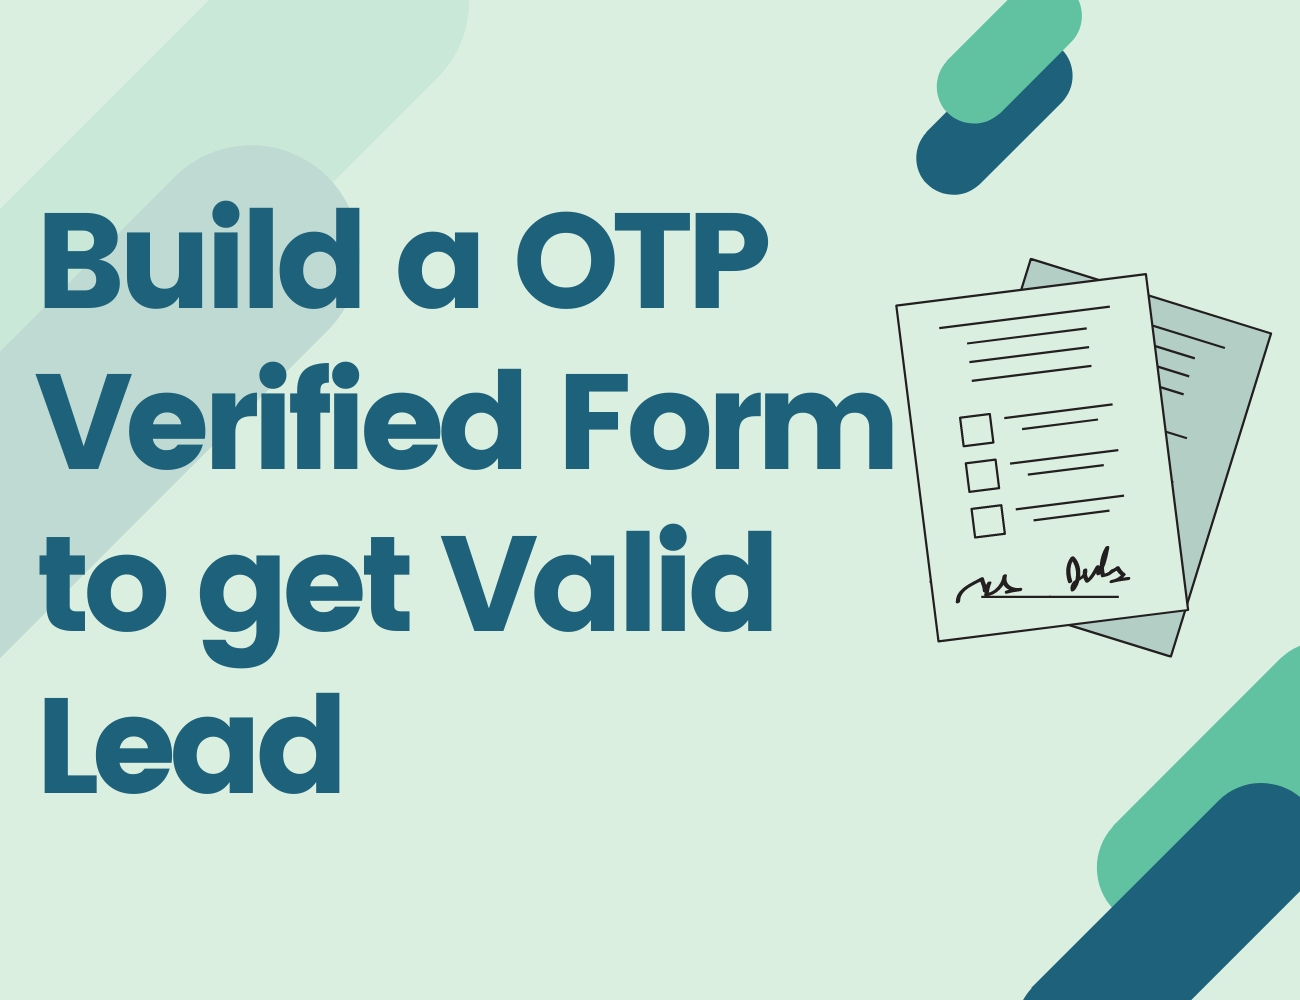 Build a OTP Verified Form to get Valid Lead